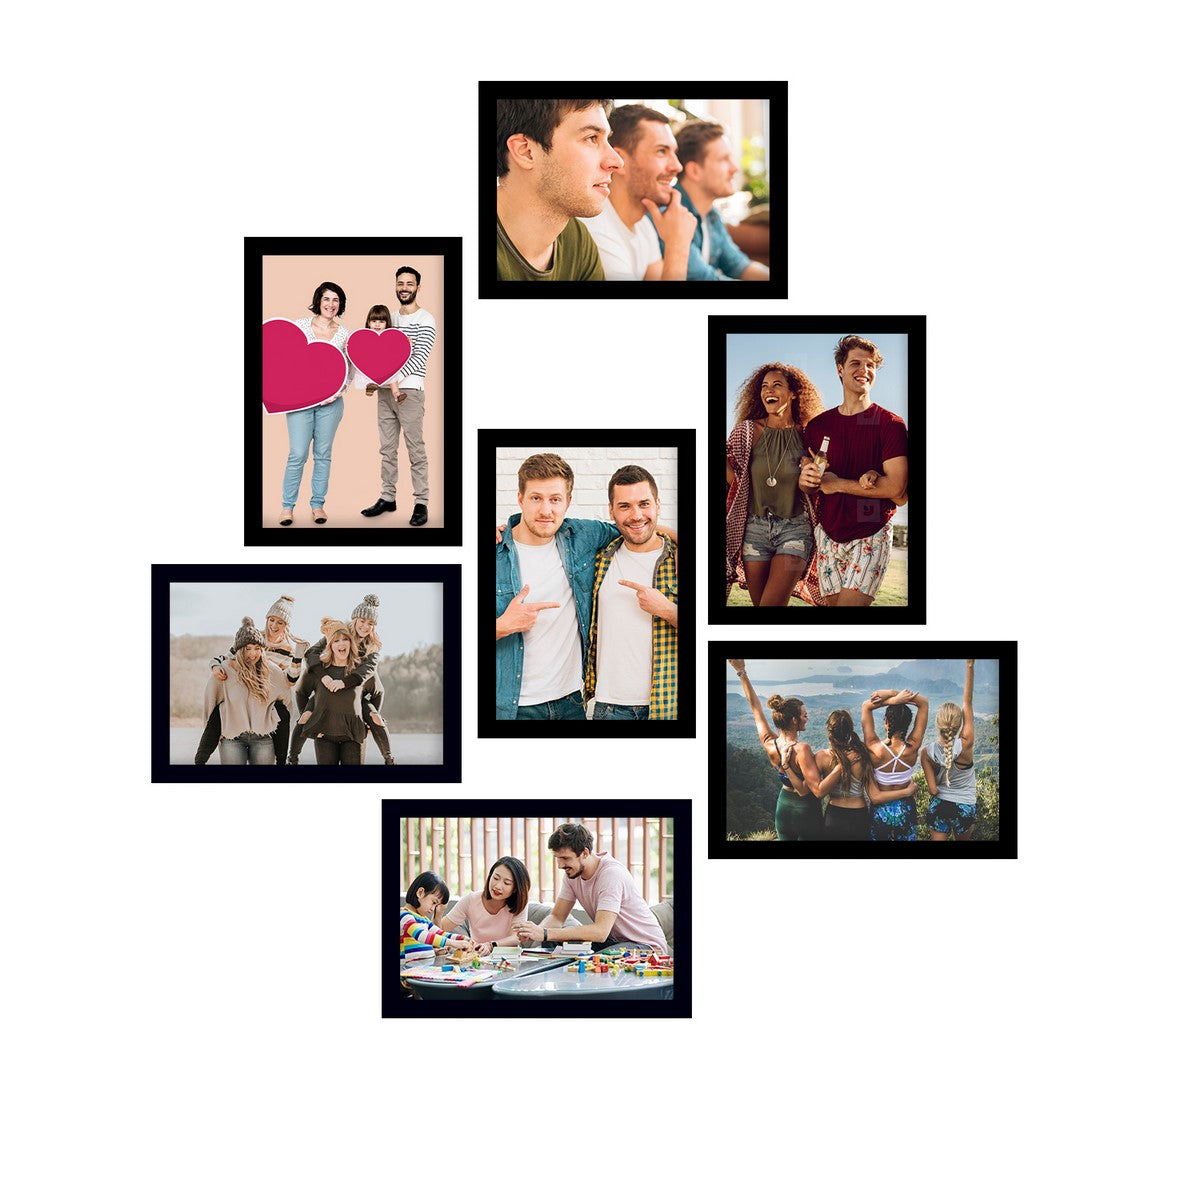 Memory Wall Collage Photo Frame - Set of 7 Photo Frames for 7 Photos of 5"x7"